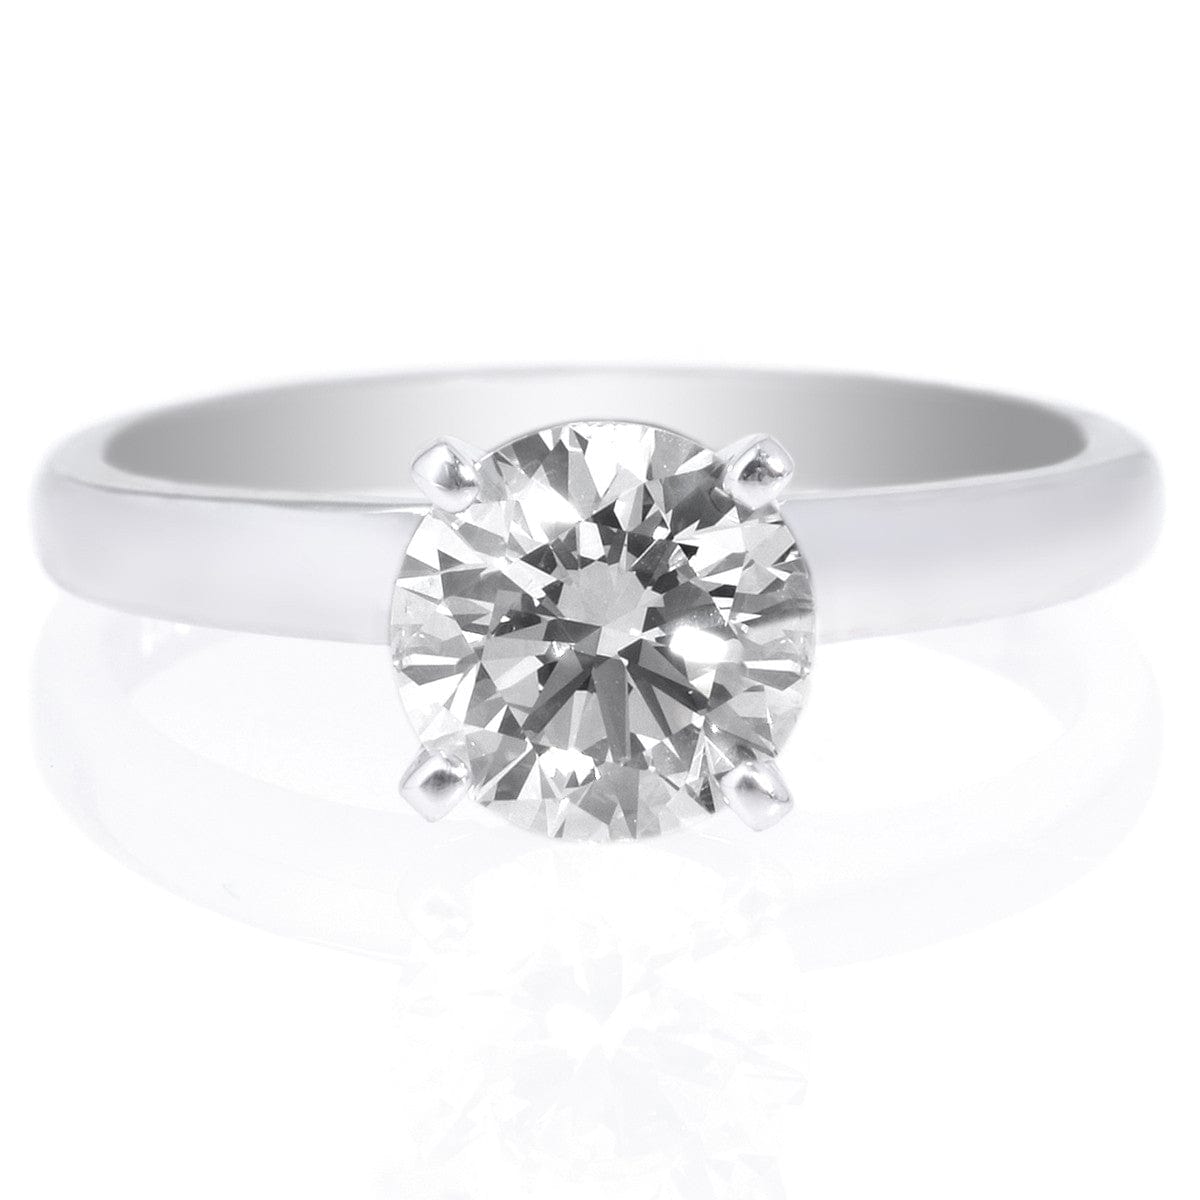 Platinum Four-Prong Solitaire Engagement Ring Setting